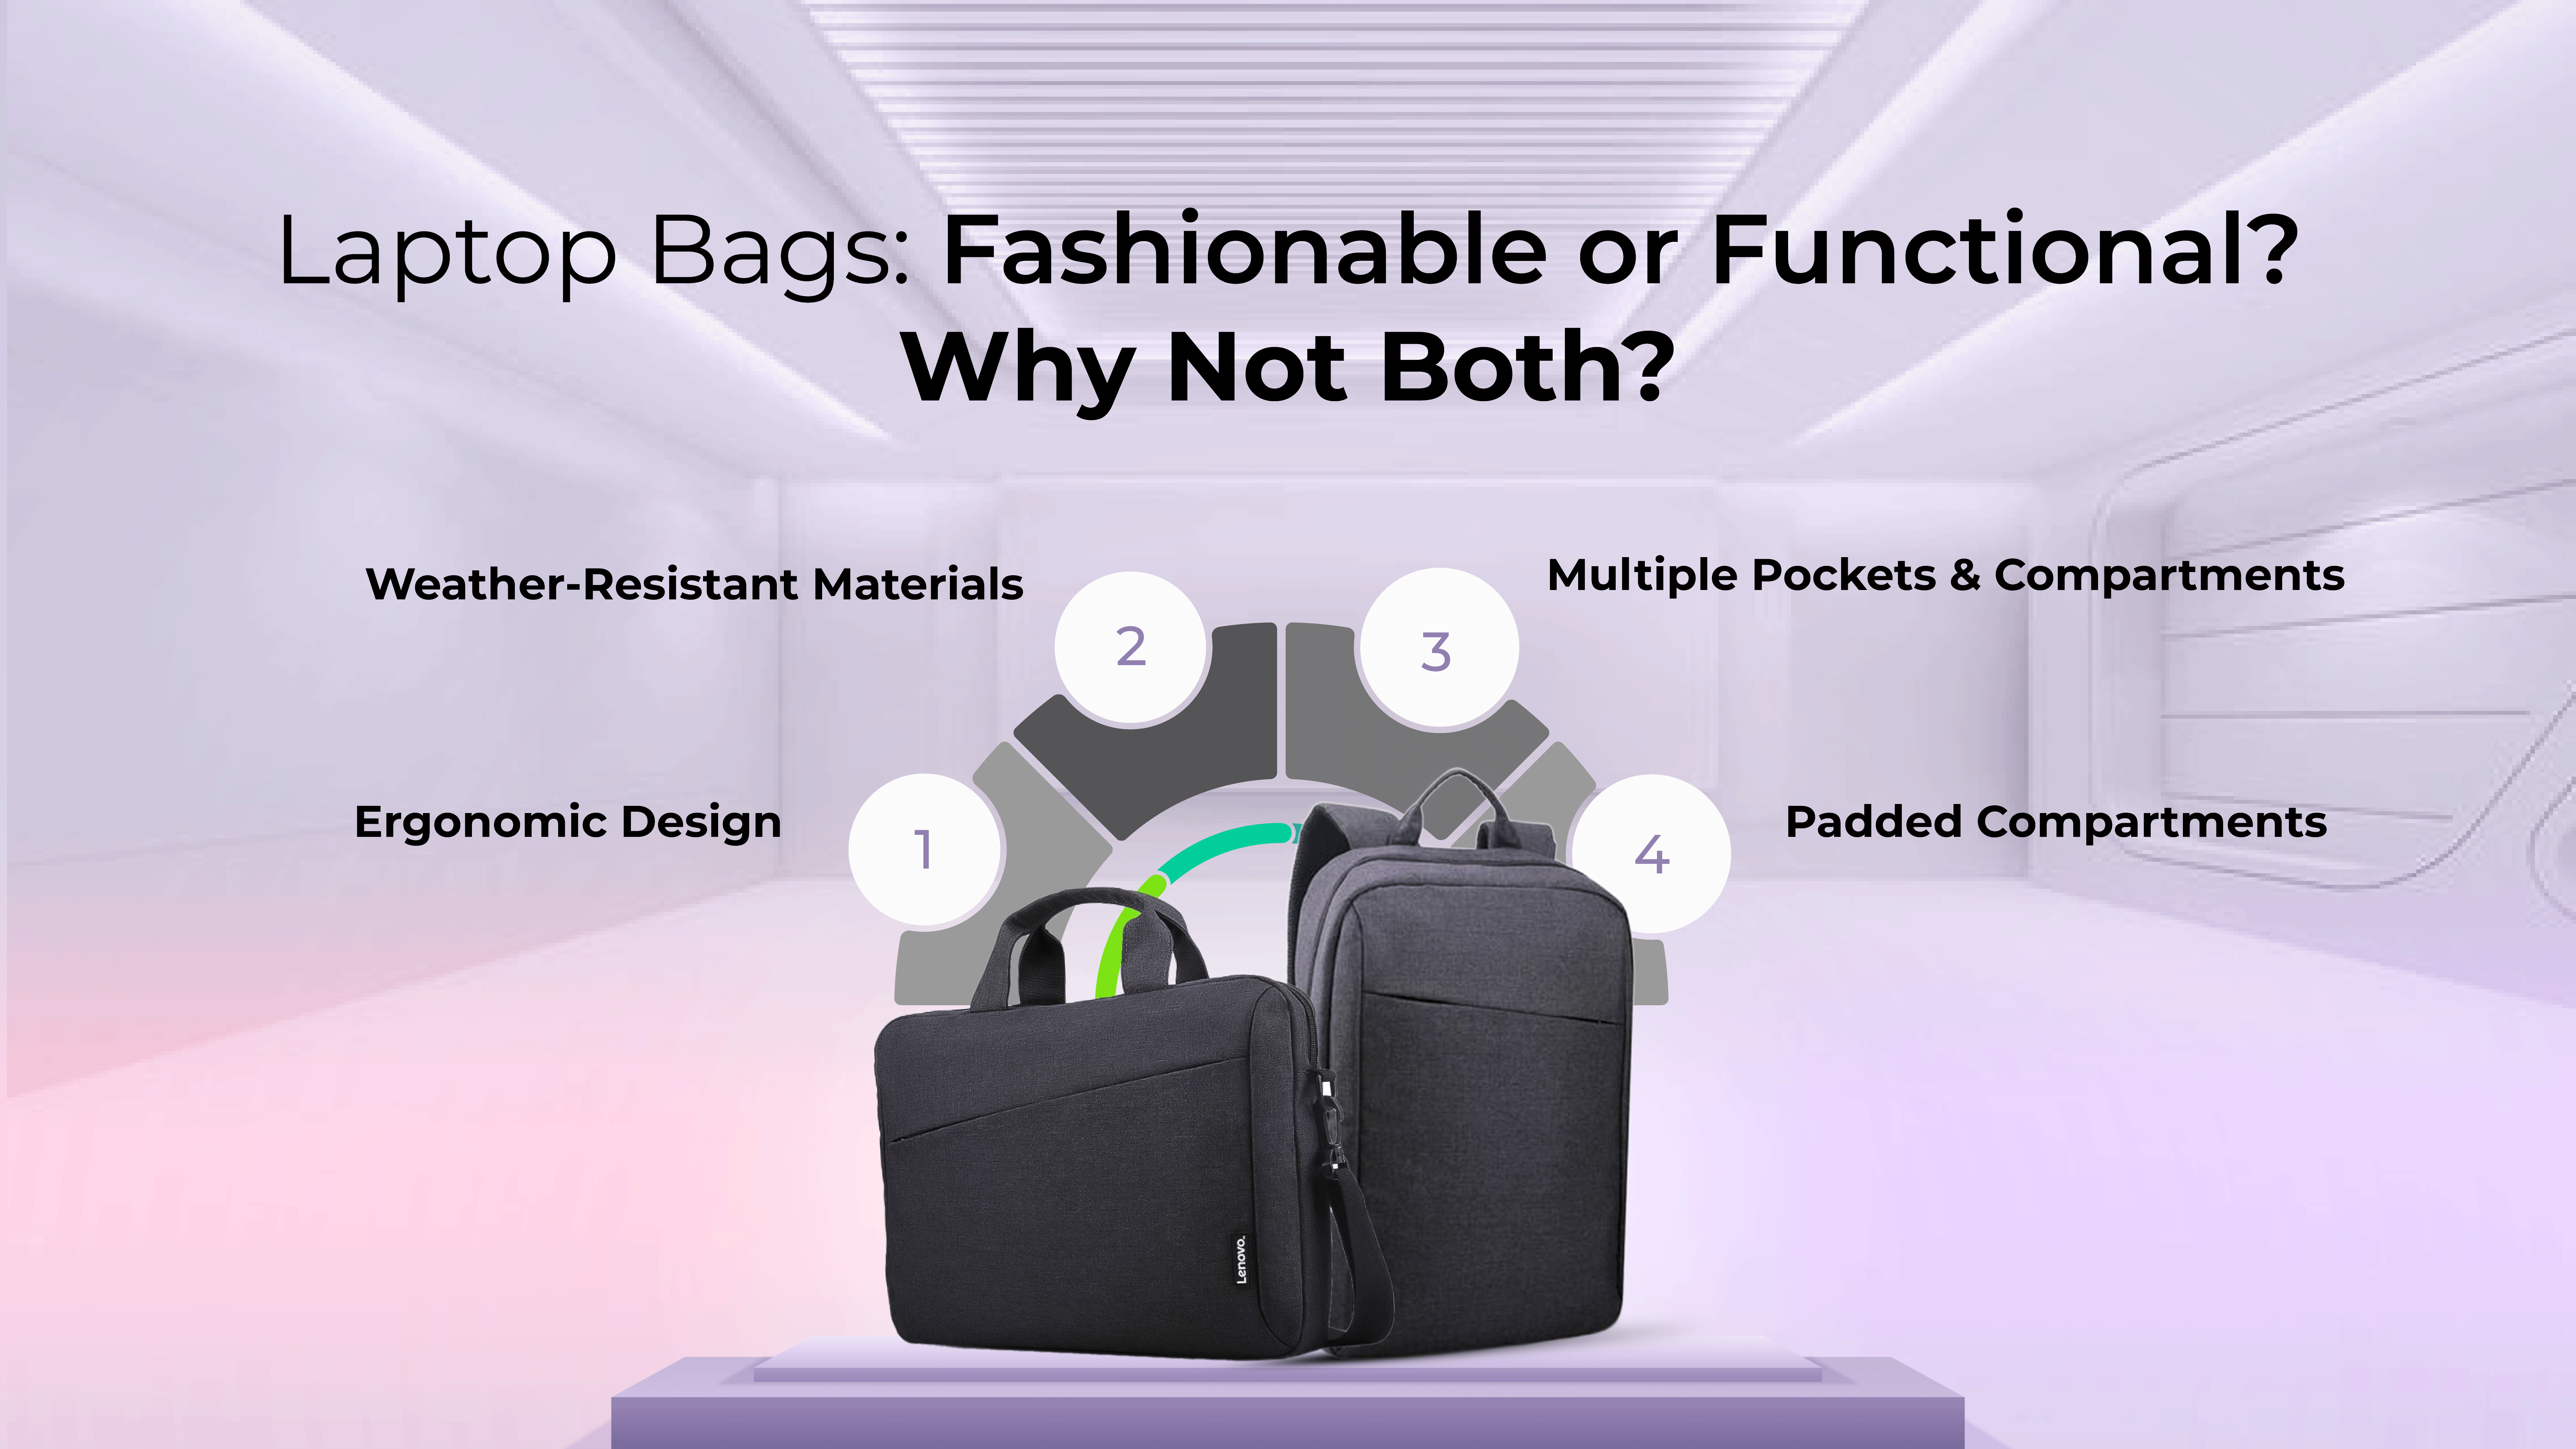 Laptop Bags: Fashionable or Functional? Why Not Both?